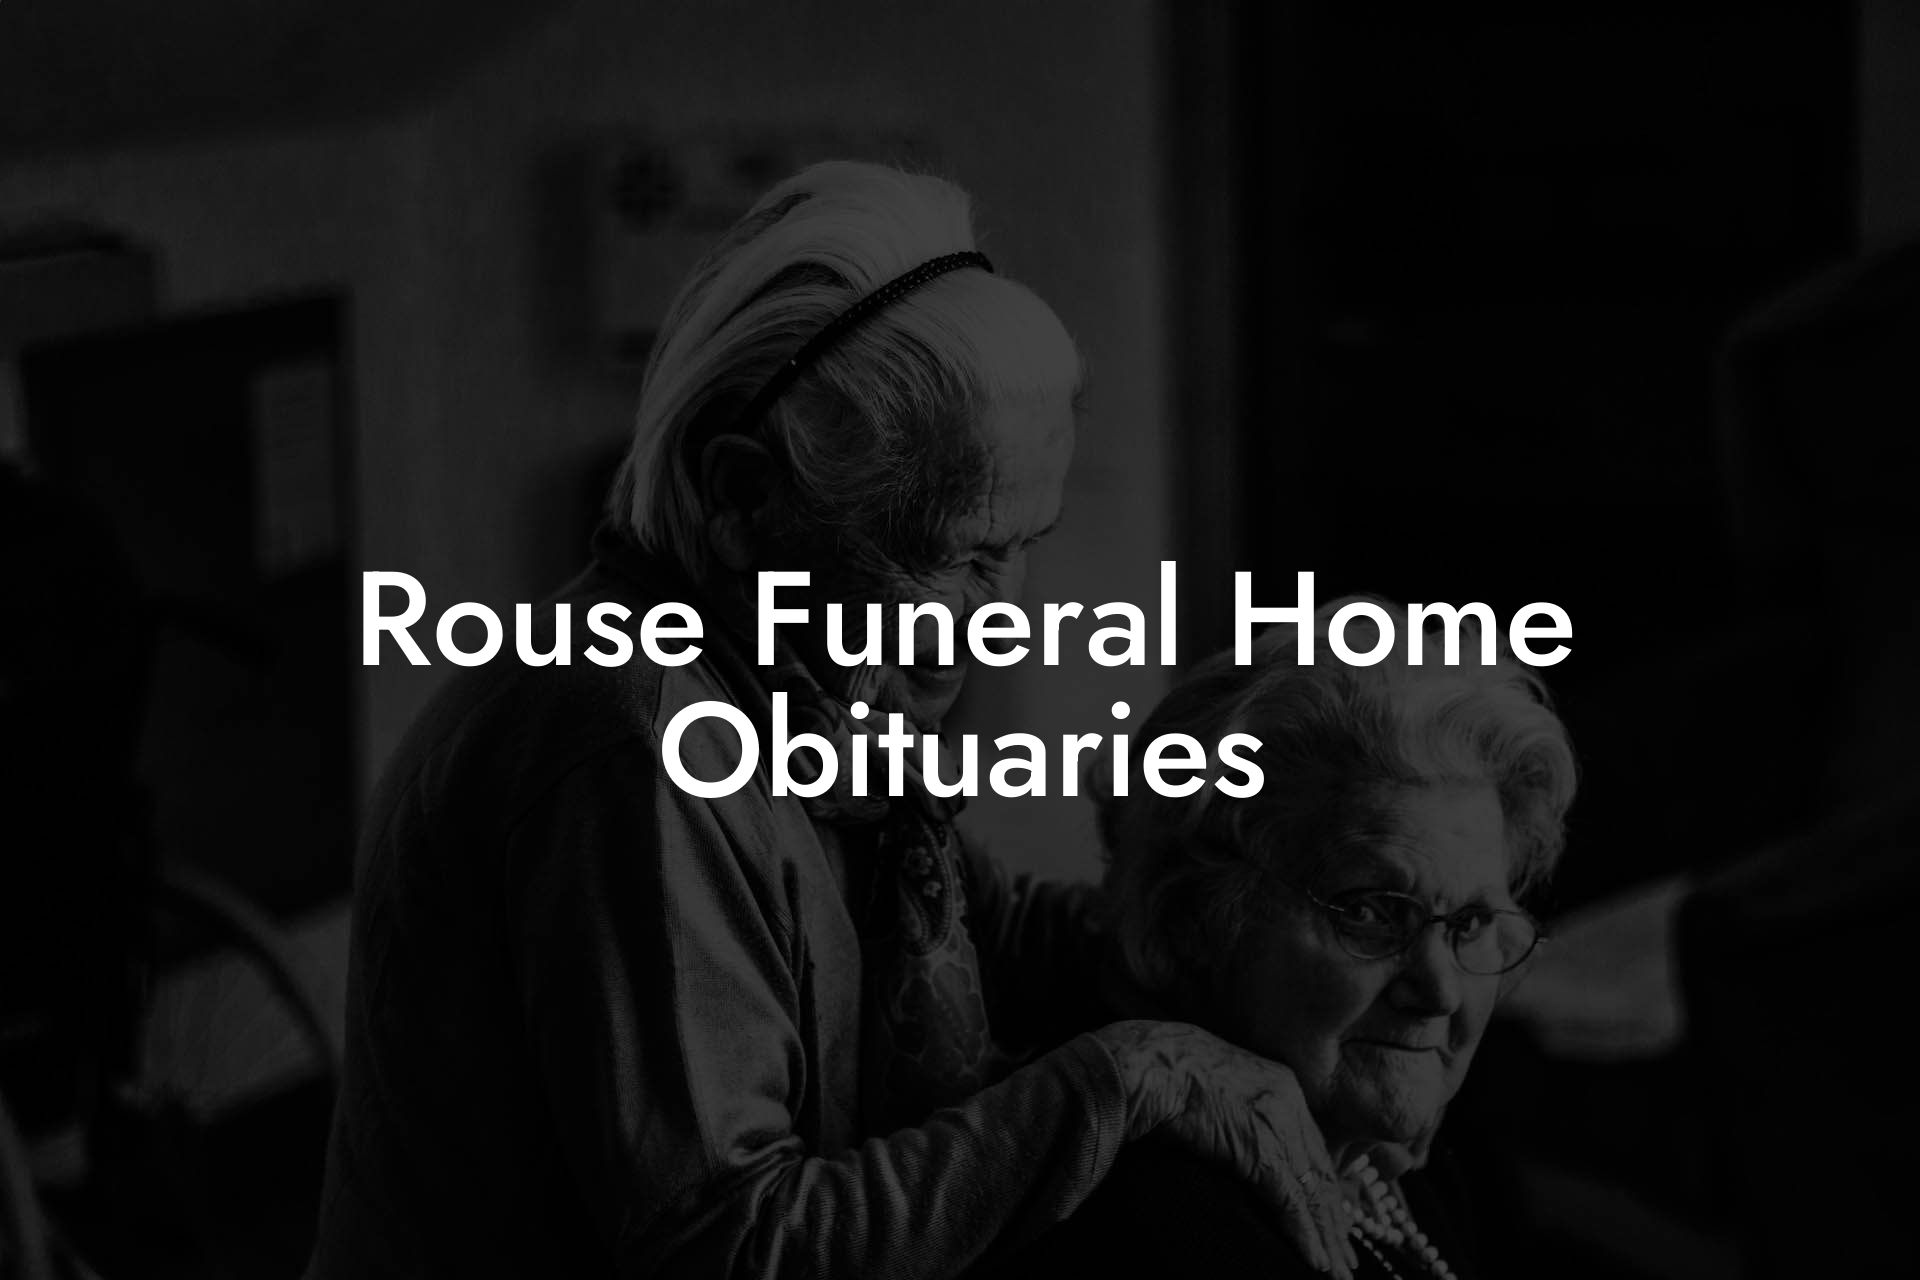 Rouse Funeral Home Obituaries